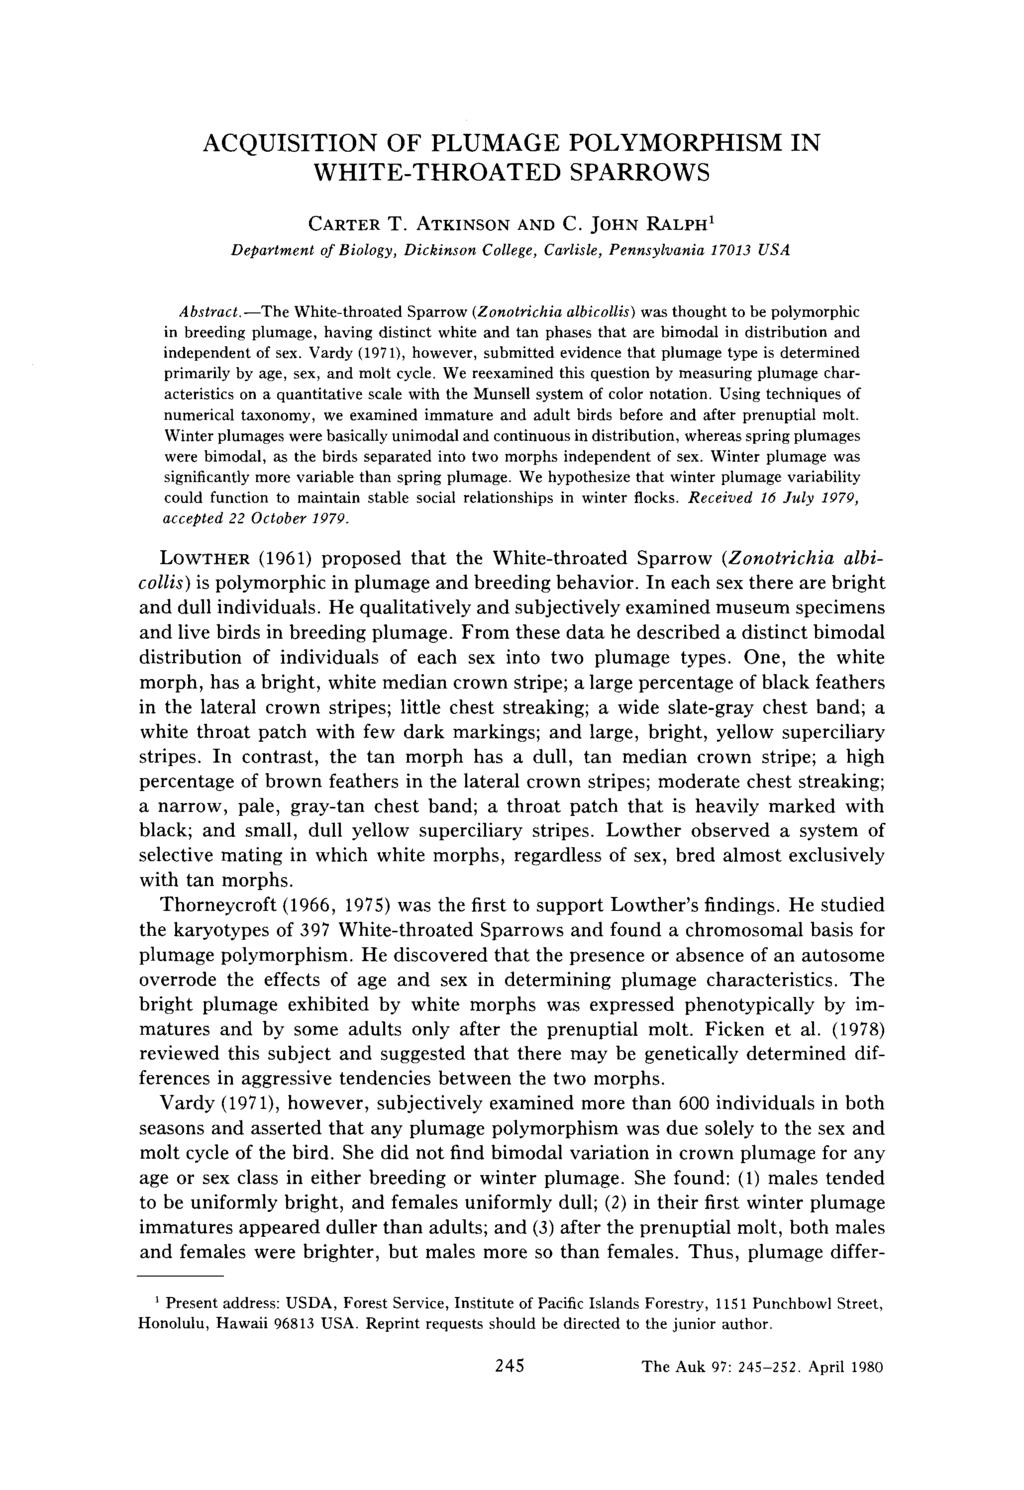 ACQUISITION OF PLUMAGE POLYMORPHISM IN WHITE-THROATED SPARROWS CARTER T. ATKINSON AND C. JOHN RALPH 1 Department of Biology, Dickinson College, Carlisle, Pennsylvania 17013 USA Abstract.